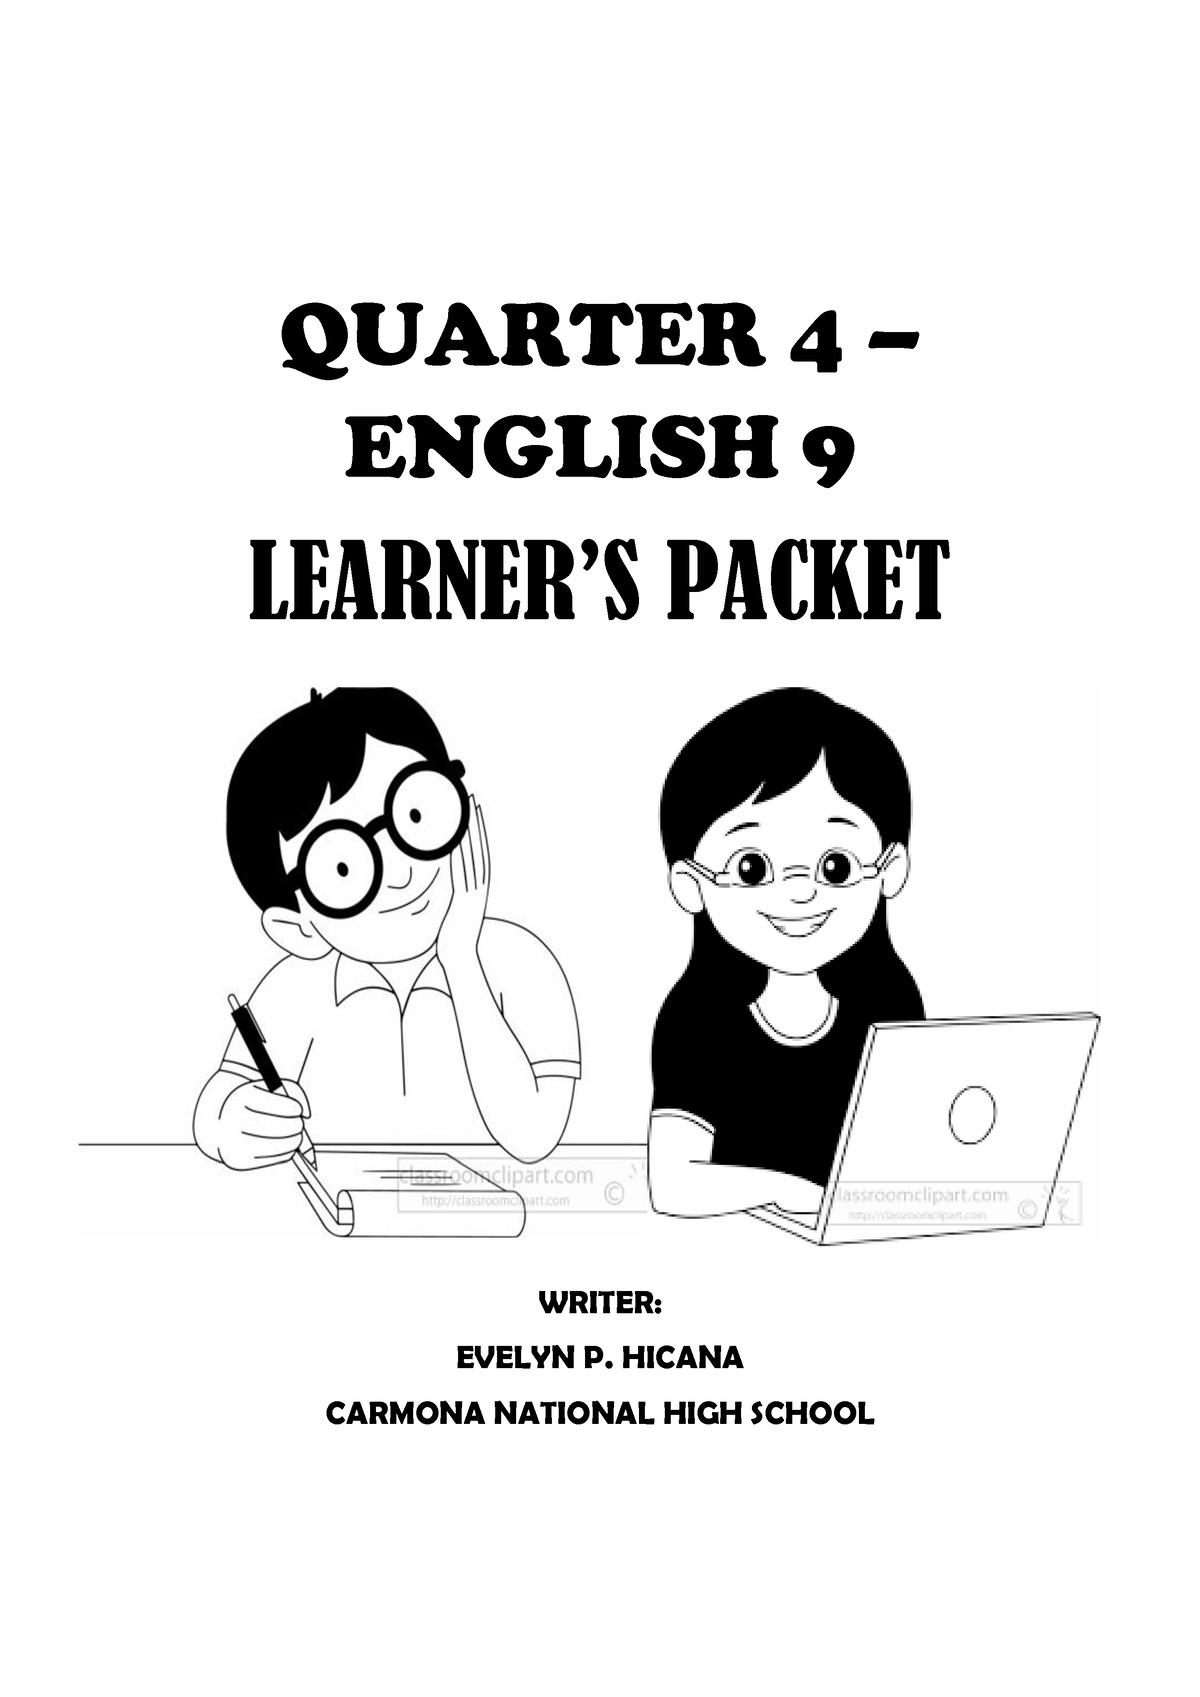 Quarter 4 Learners Packet Quarter 4 English 9 Learners Packet Writer Evelyn P Hicana 4783